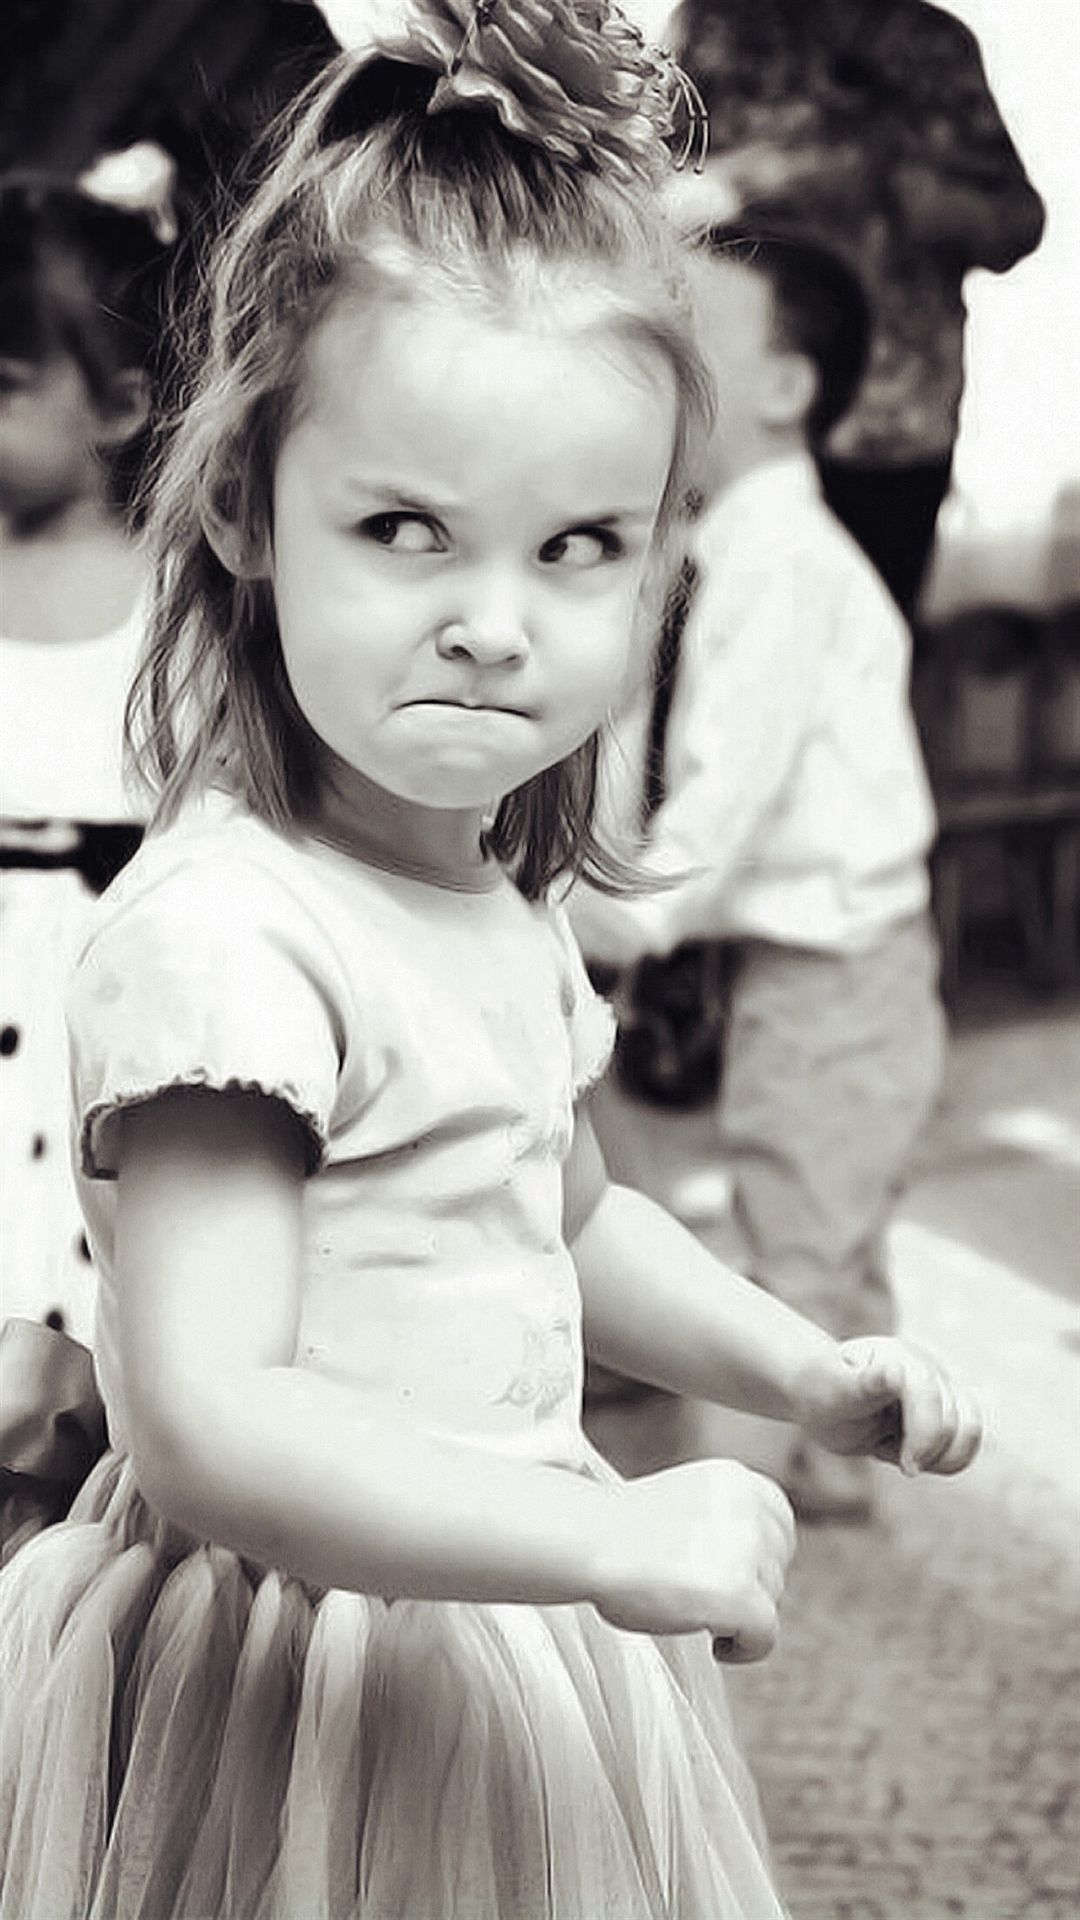 Cute Angry Girl Expression Black And White iPhone 8 Wallpaper Free Download